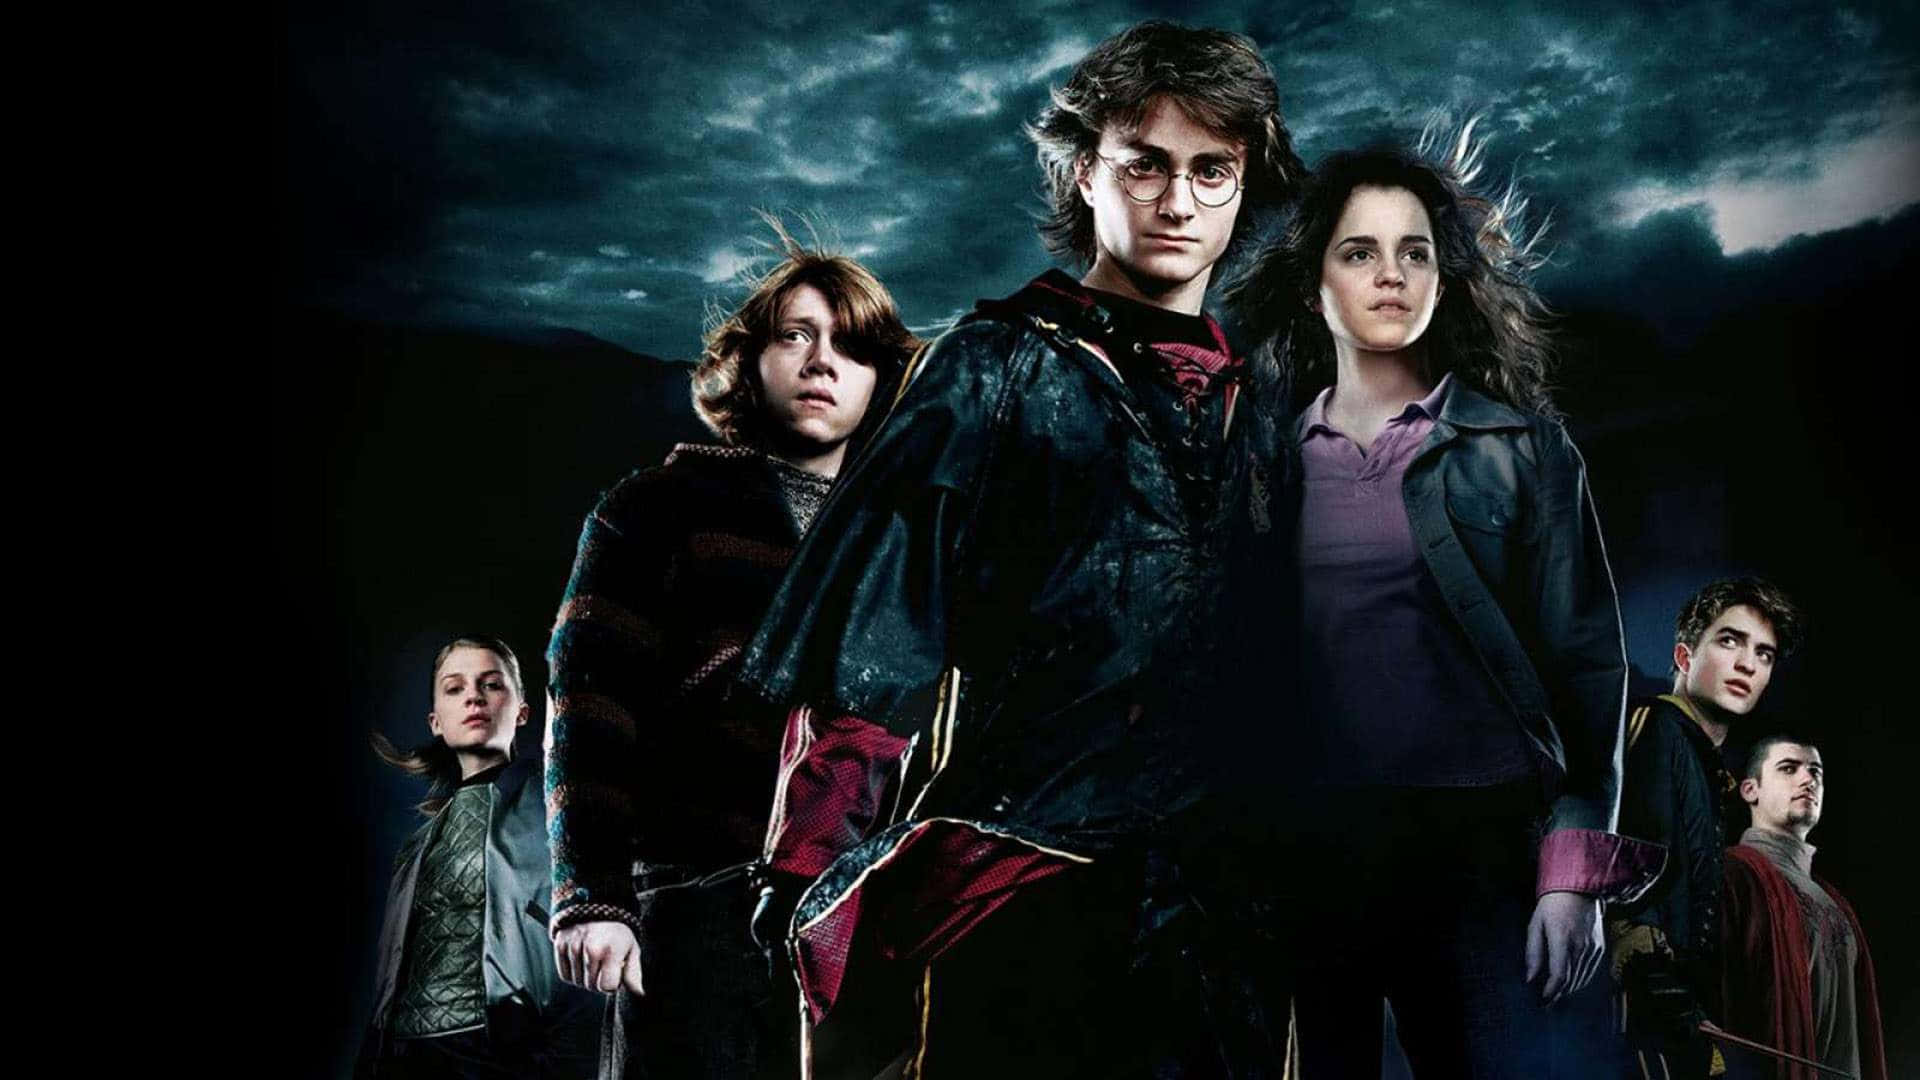 Hogwarts students compete in The Goblet Of Fire Wallpaper